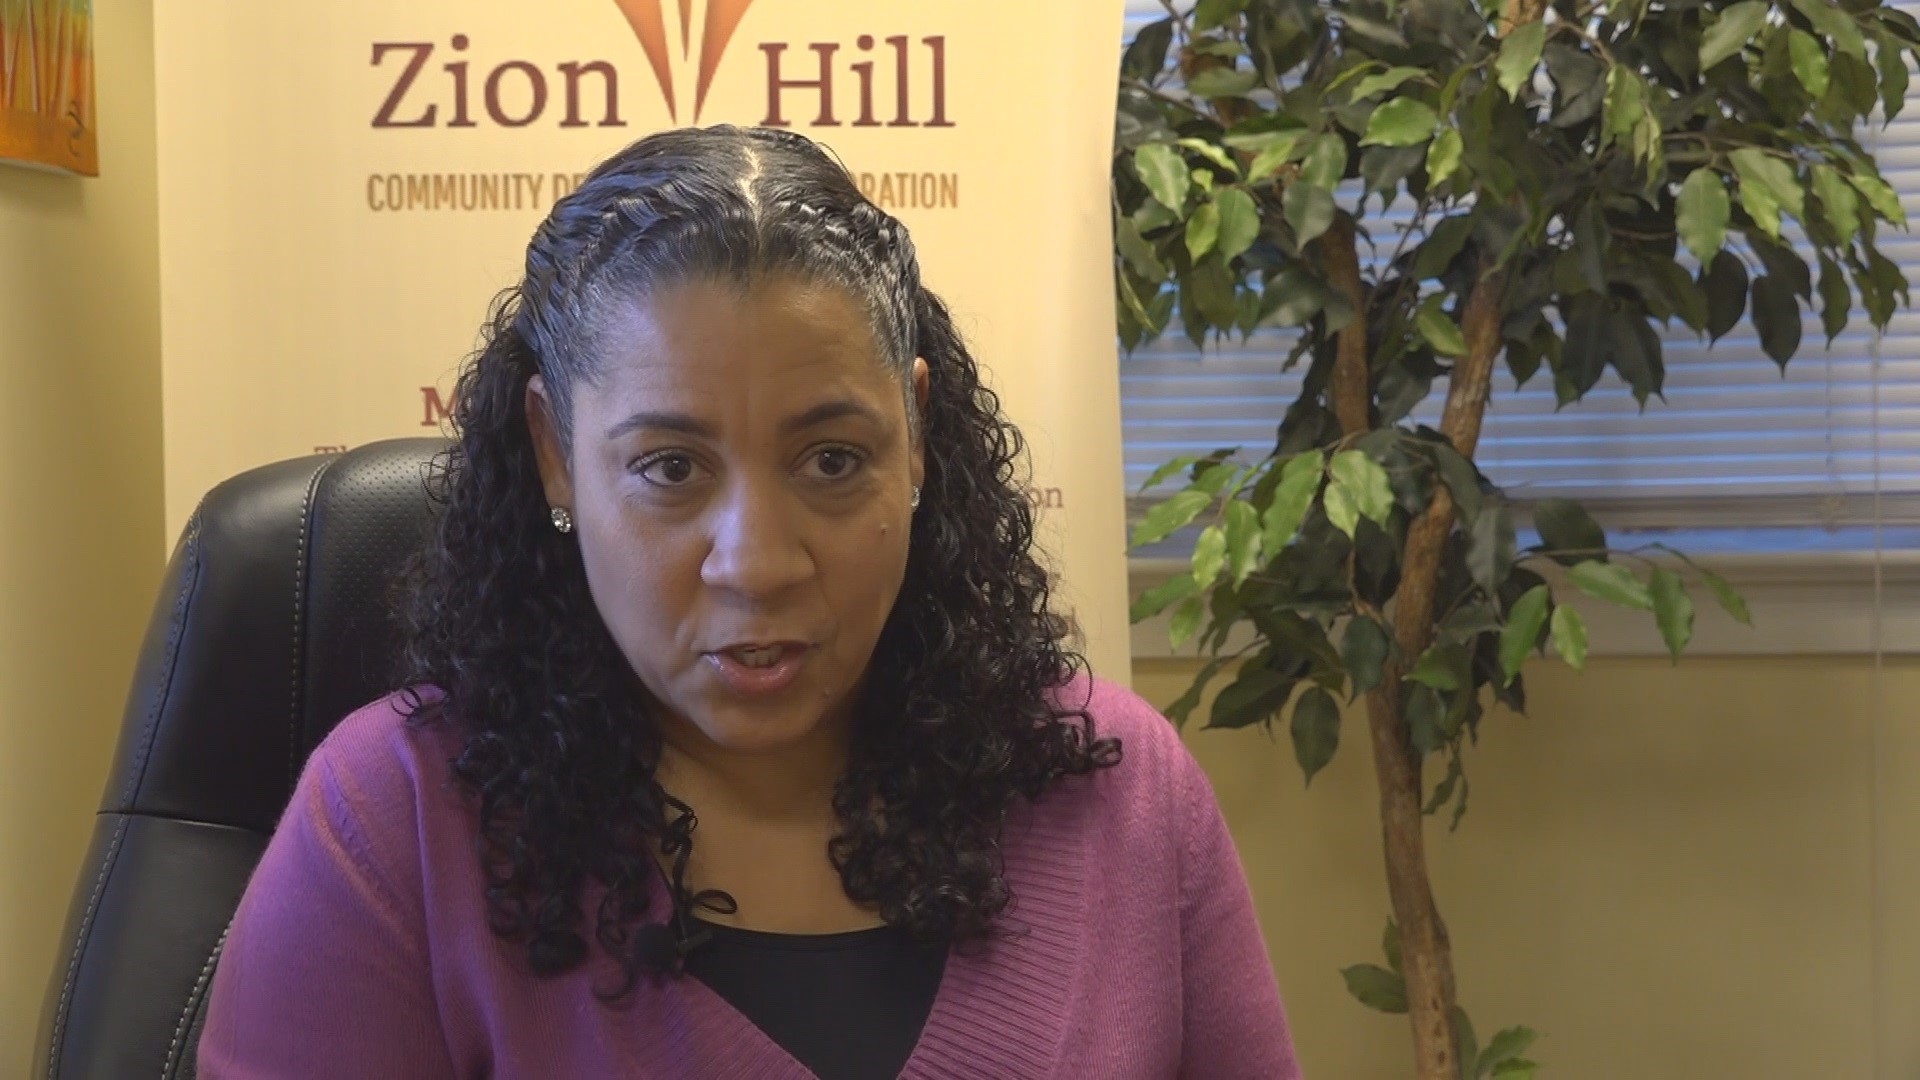 Zion Hill is mostly know as a place to help East Point's homeless, but they are also working hard to make sure people can stay in their home in the first place.